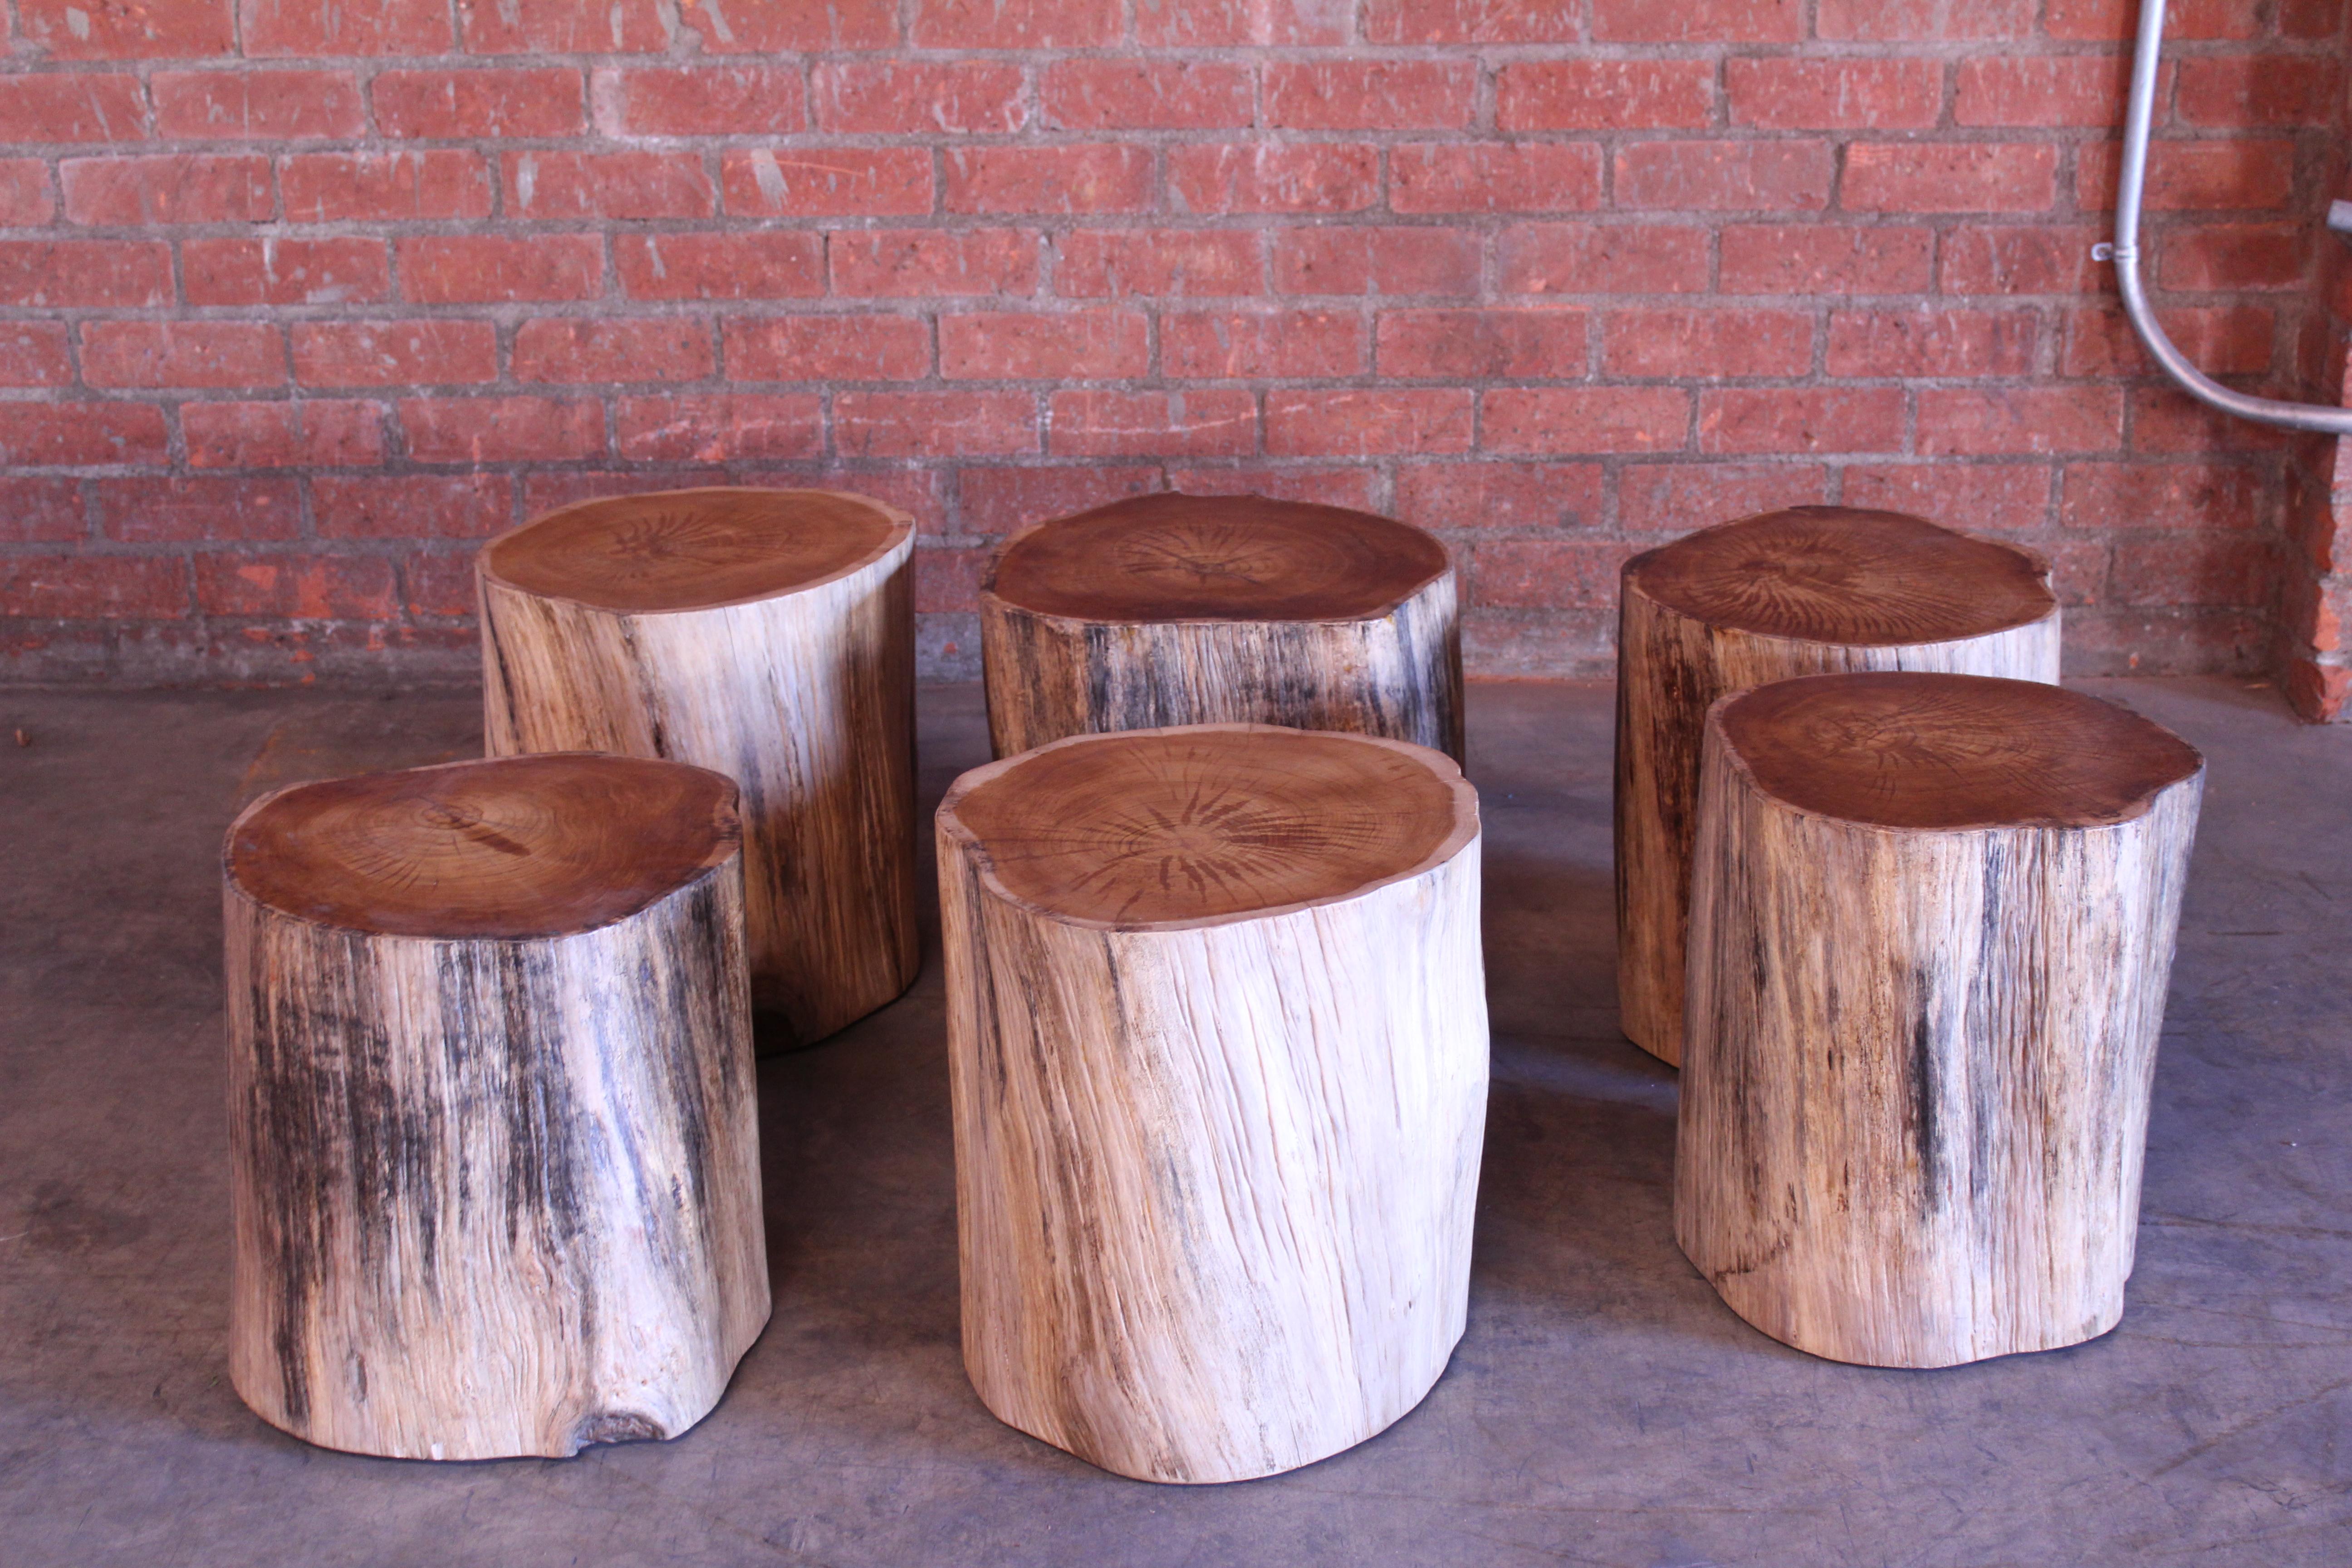 Solid teak wood stump tables. Heavy weight. Sold individually. Roughly 17 diameter and 18 inches high.